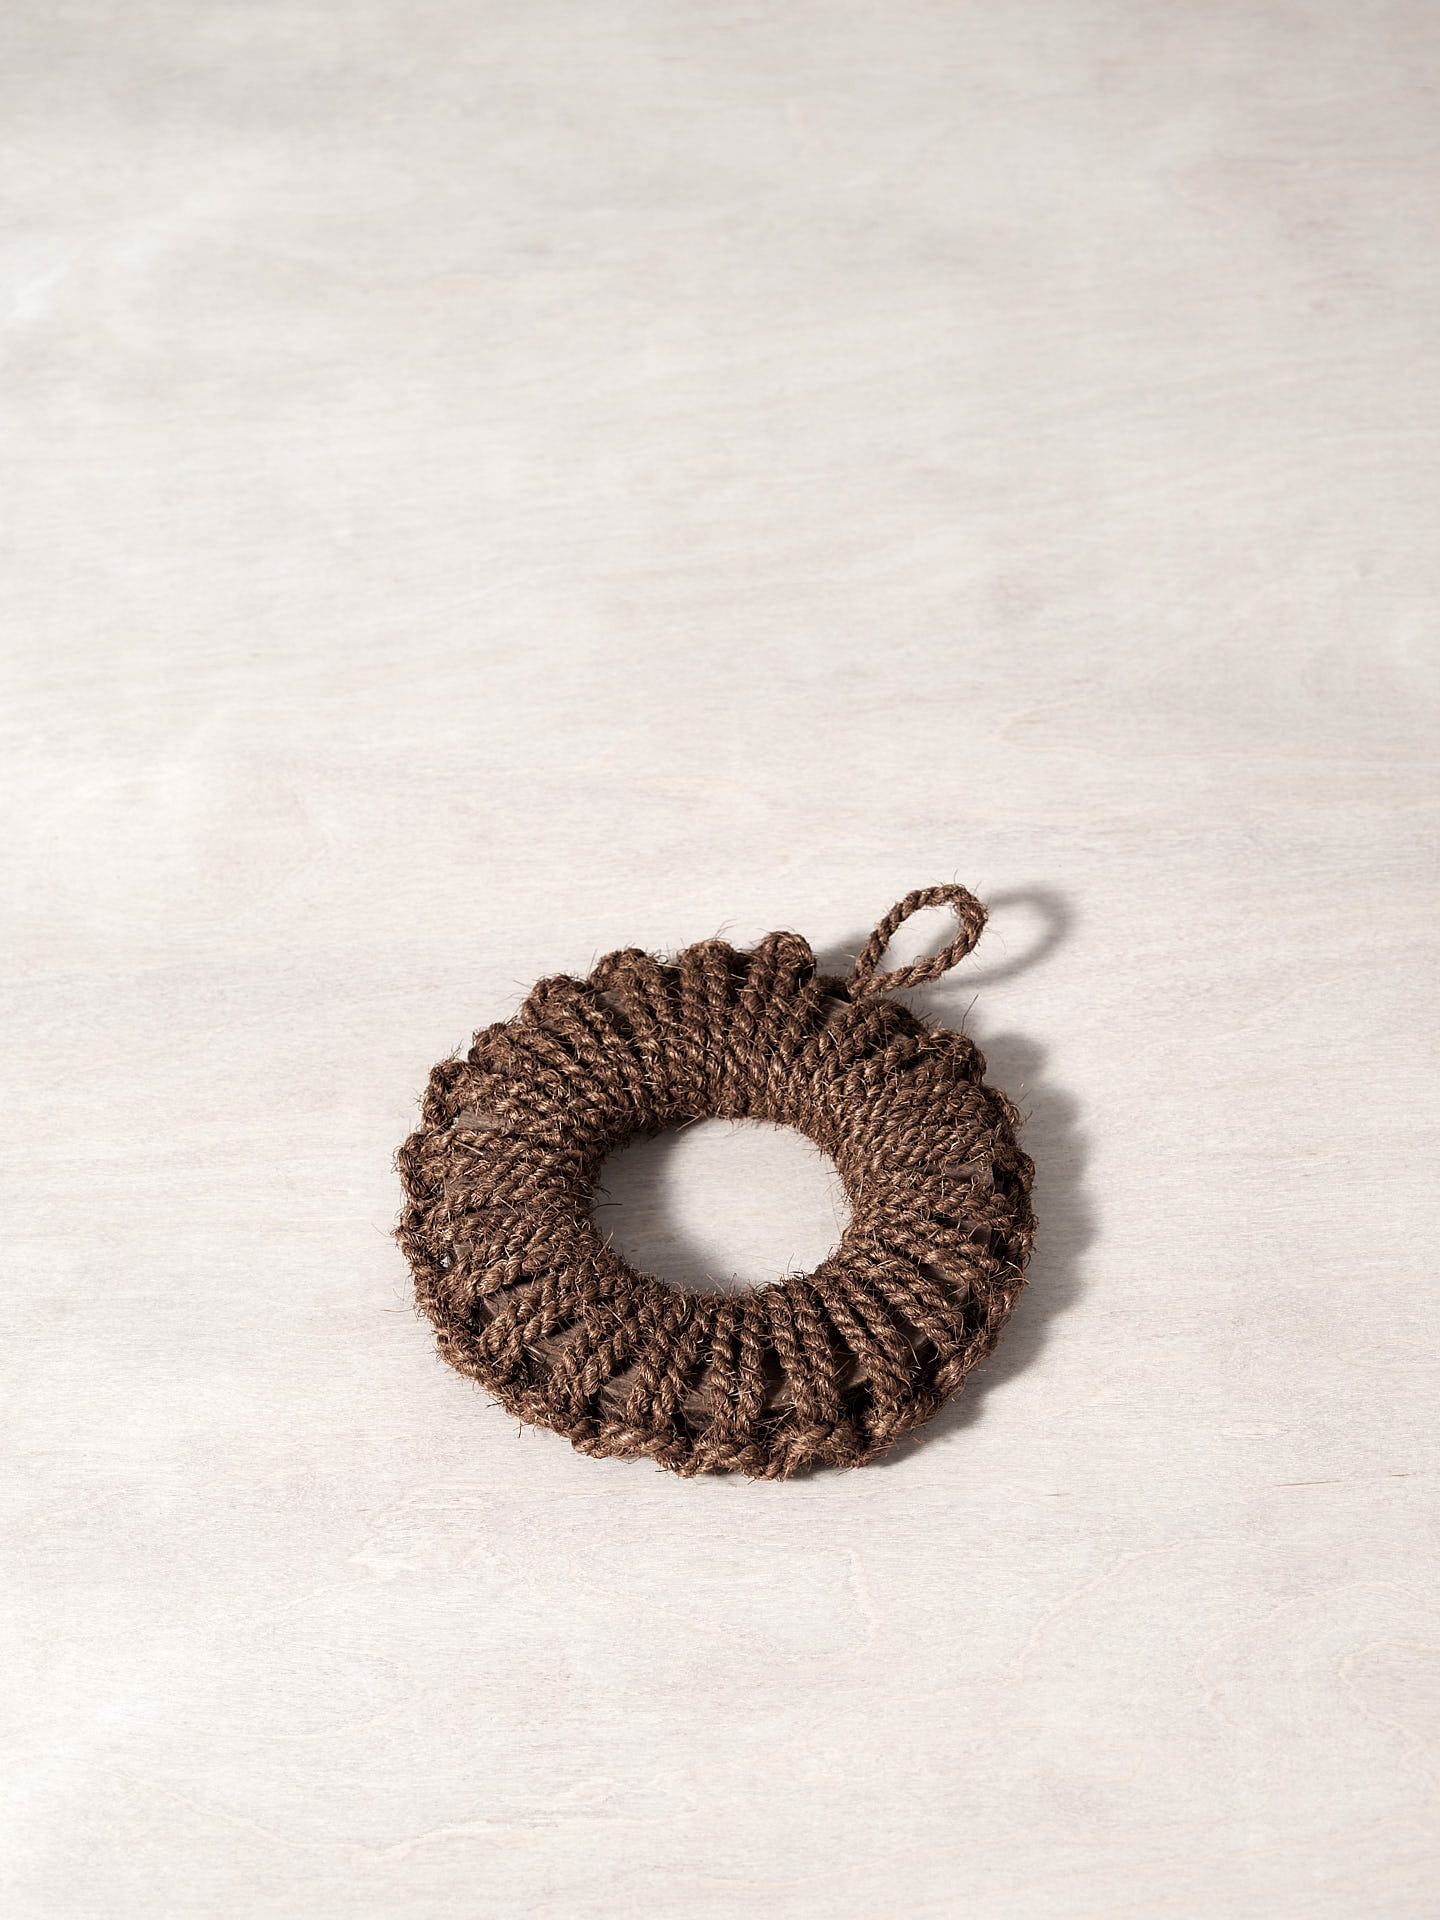 A Takada Hand-Knit Trivet – Small brown rope ornament on a white surface.